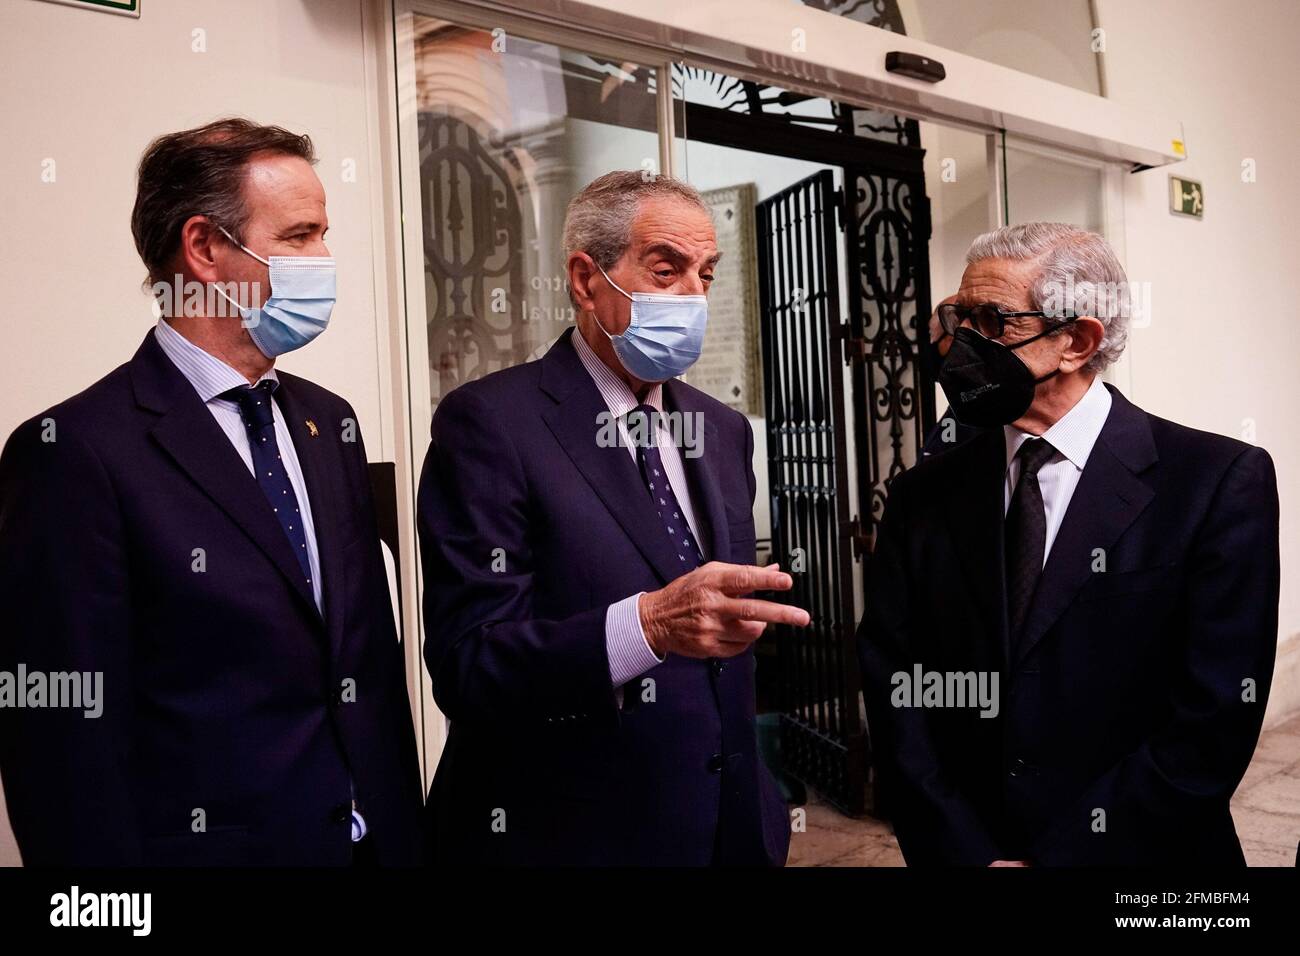 Malaga, Spain. 07th May, 2021. President of Agrupacion de Cofradias de Semana Santa de Malaga, Pablo Atencia (l), Former Mayor of Malaga, Luis Merino Bayona (c) and President of Fundacion Unicaja Braulio Medel (r) during the exhibition at Centro Cultural Fundacion Unicaja. 'Un siglo de esplendor' is an exhibition that shows the artistic heritage of the Holy Week brotherhoods of Malaga and is one of the events organized by Agrupacion de Cofradias de Semana Santa de Malaga for the centenary of the institution. Credit: SOPA Images Limited/Alamy Live News Stock Photo